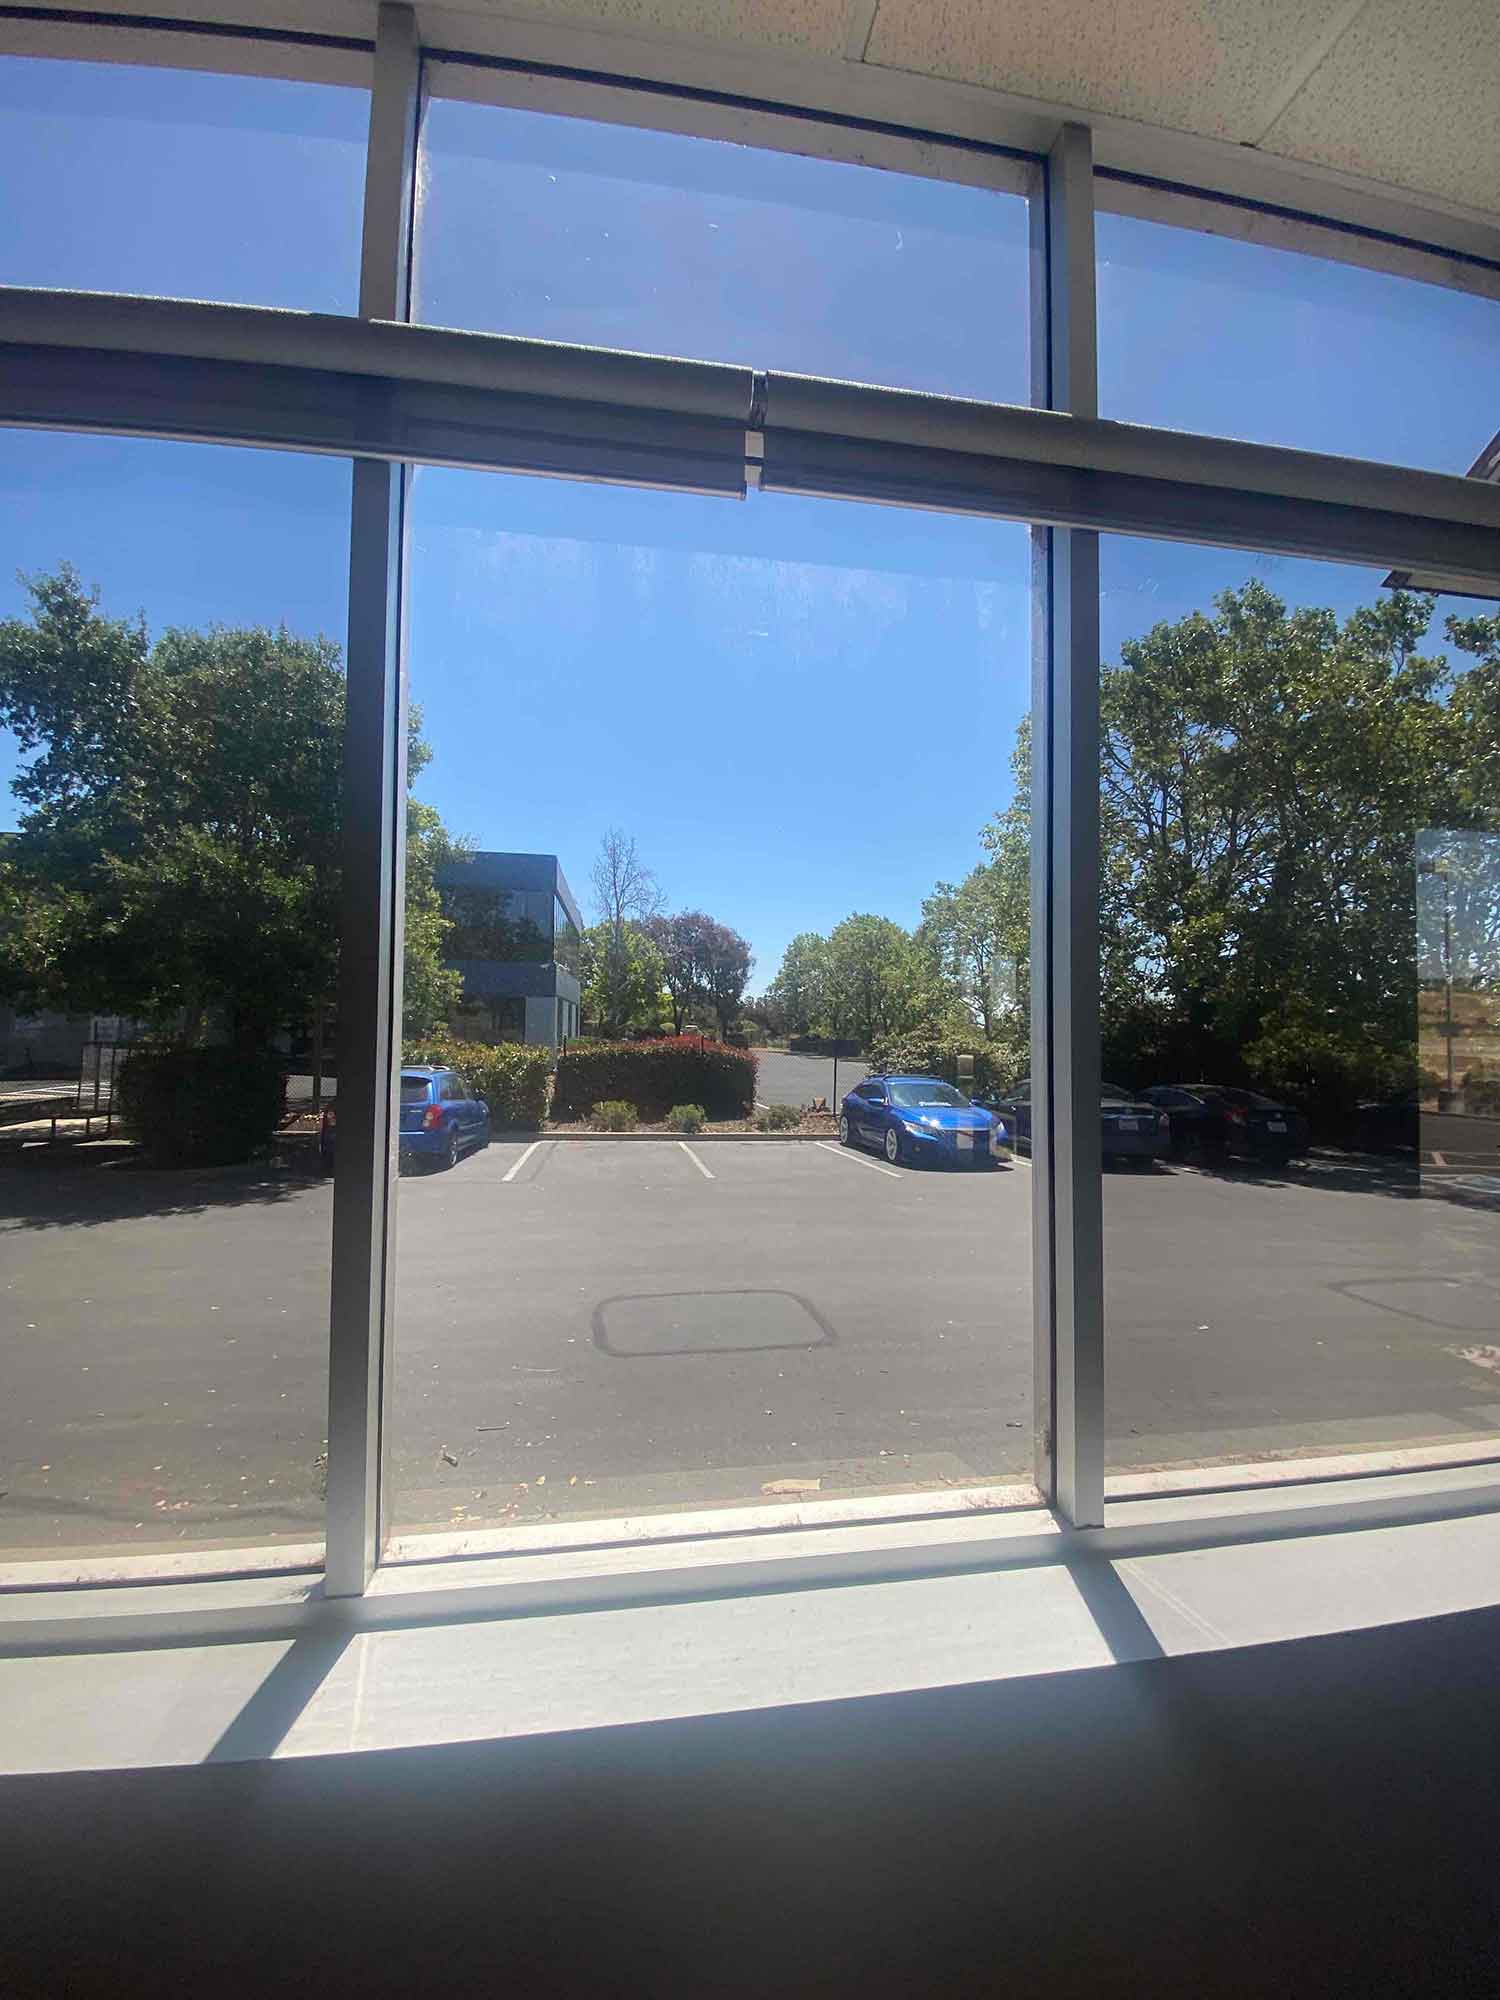 Sun Control Window Film can make a huge difference for San Francisco Bay Area businesses. Installed by ClimatePro.